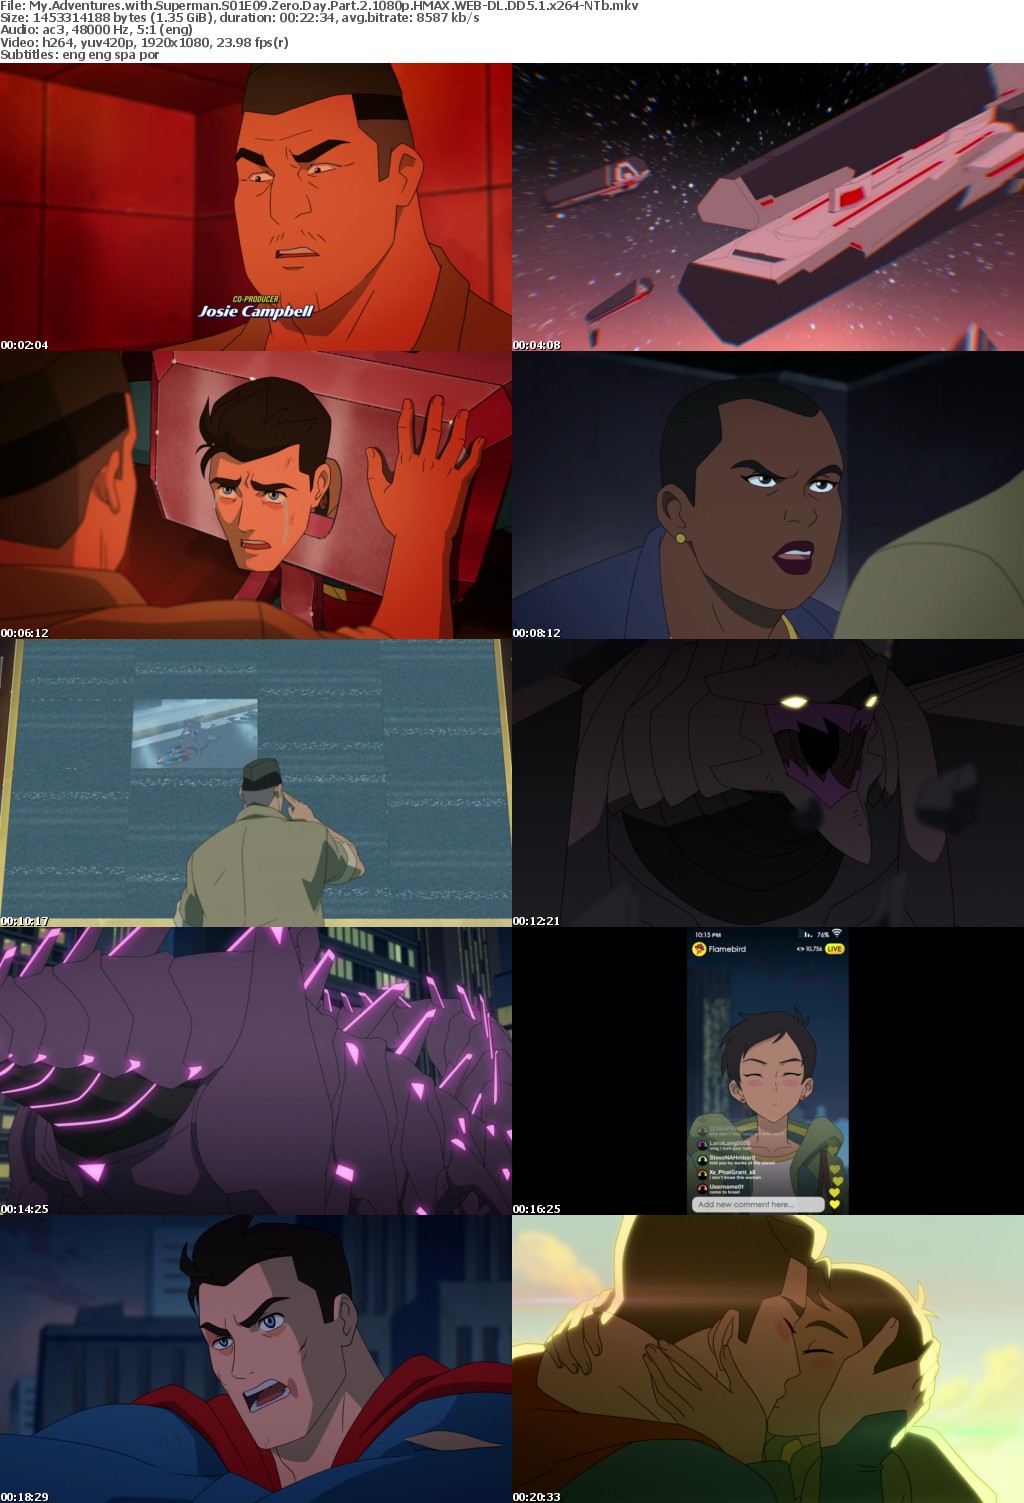 My Adventures with Superman S01E09 Zero Day Part 2 1080p HMAX WEB-DL DD5 1 x264-NTb